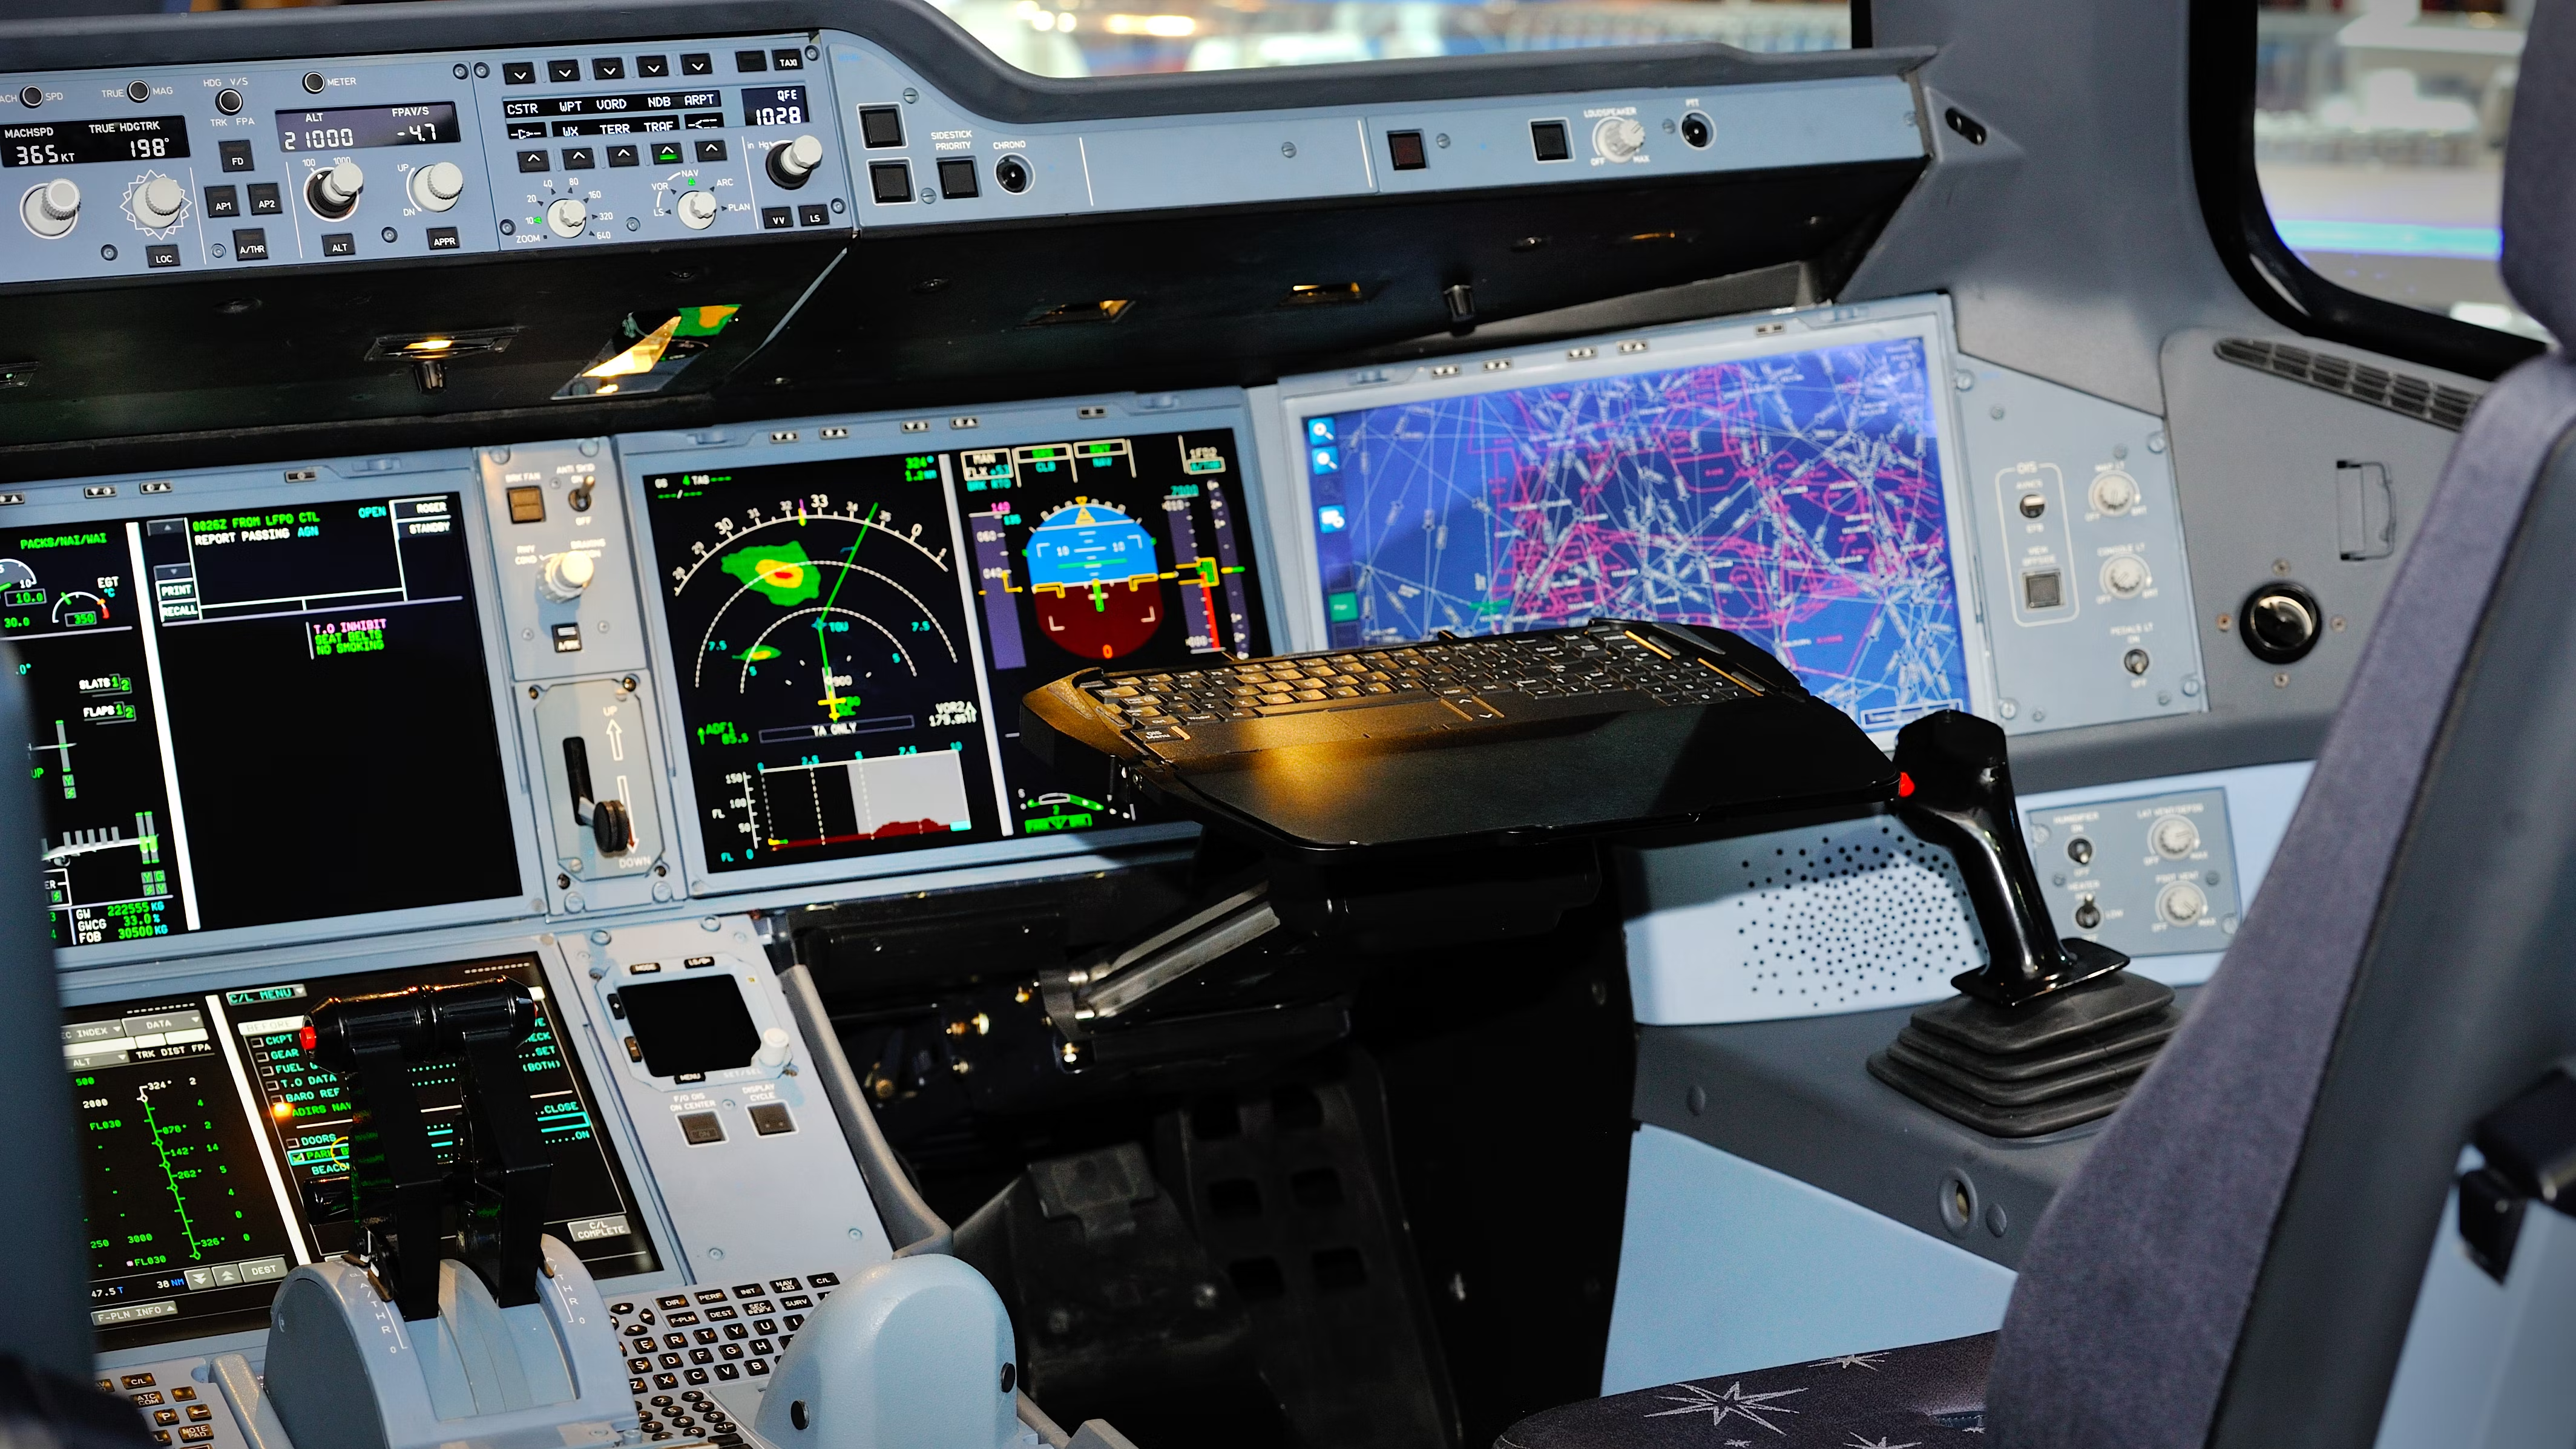 Inside the Cockpit of an Airbus A350 with weather maps showing.